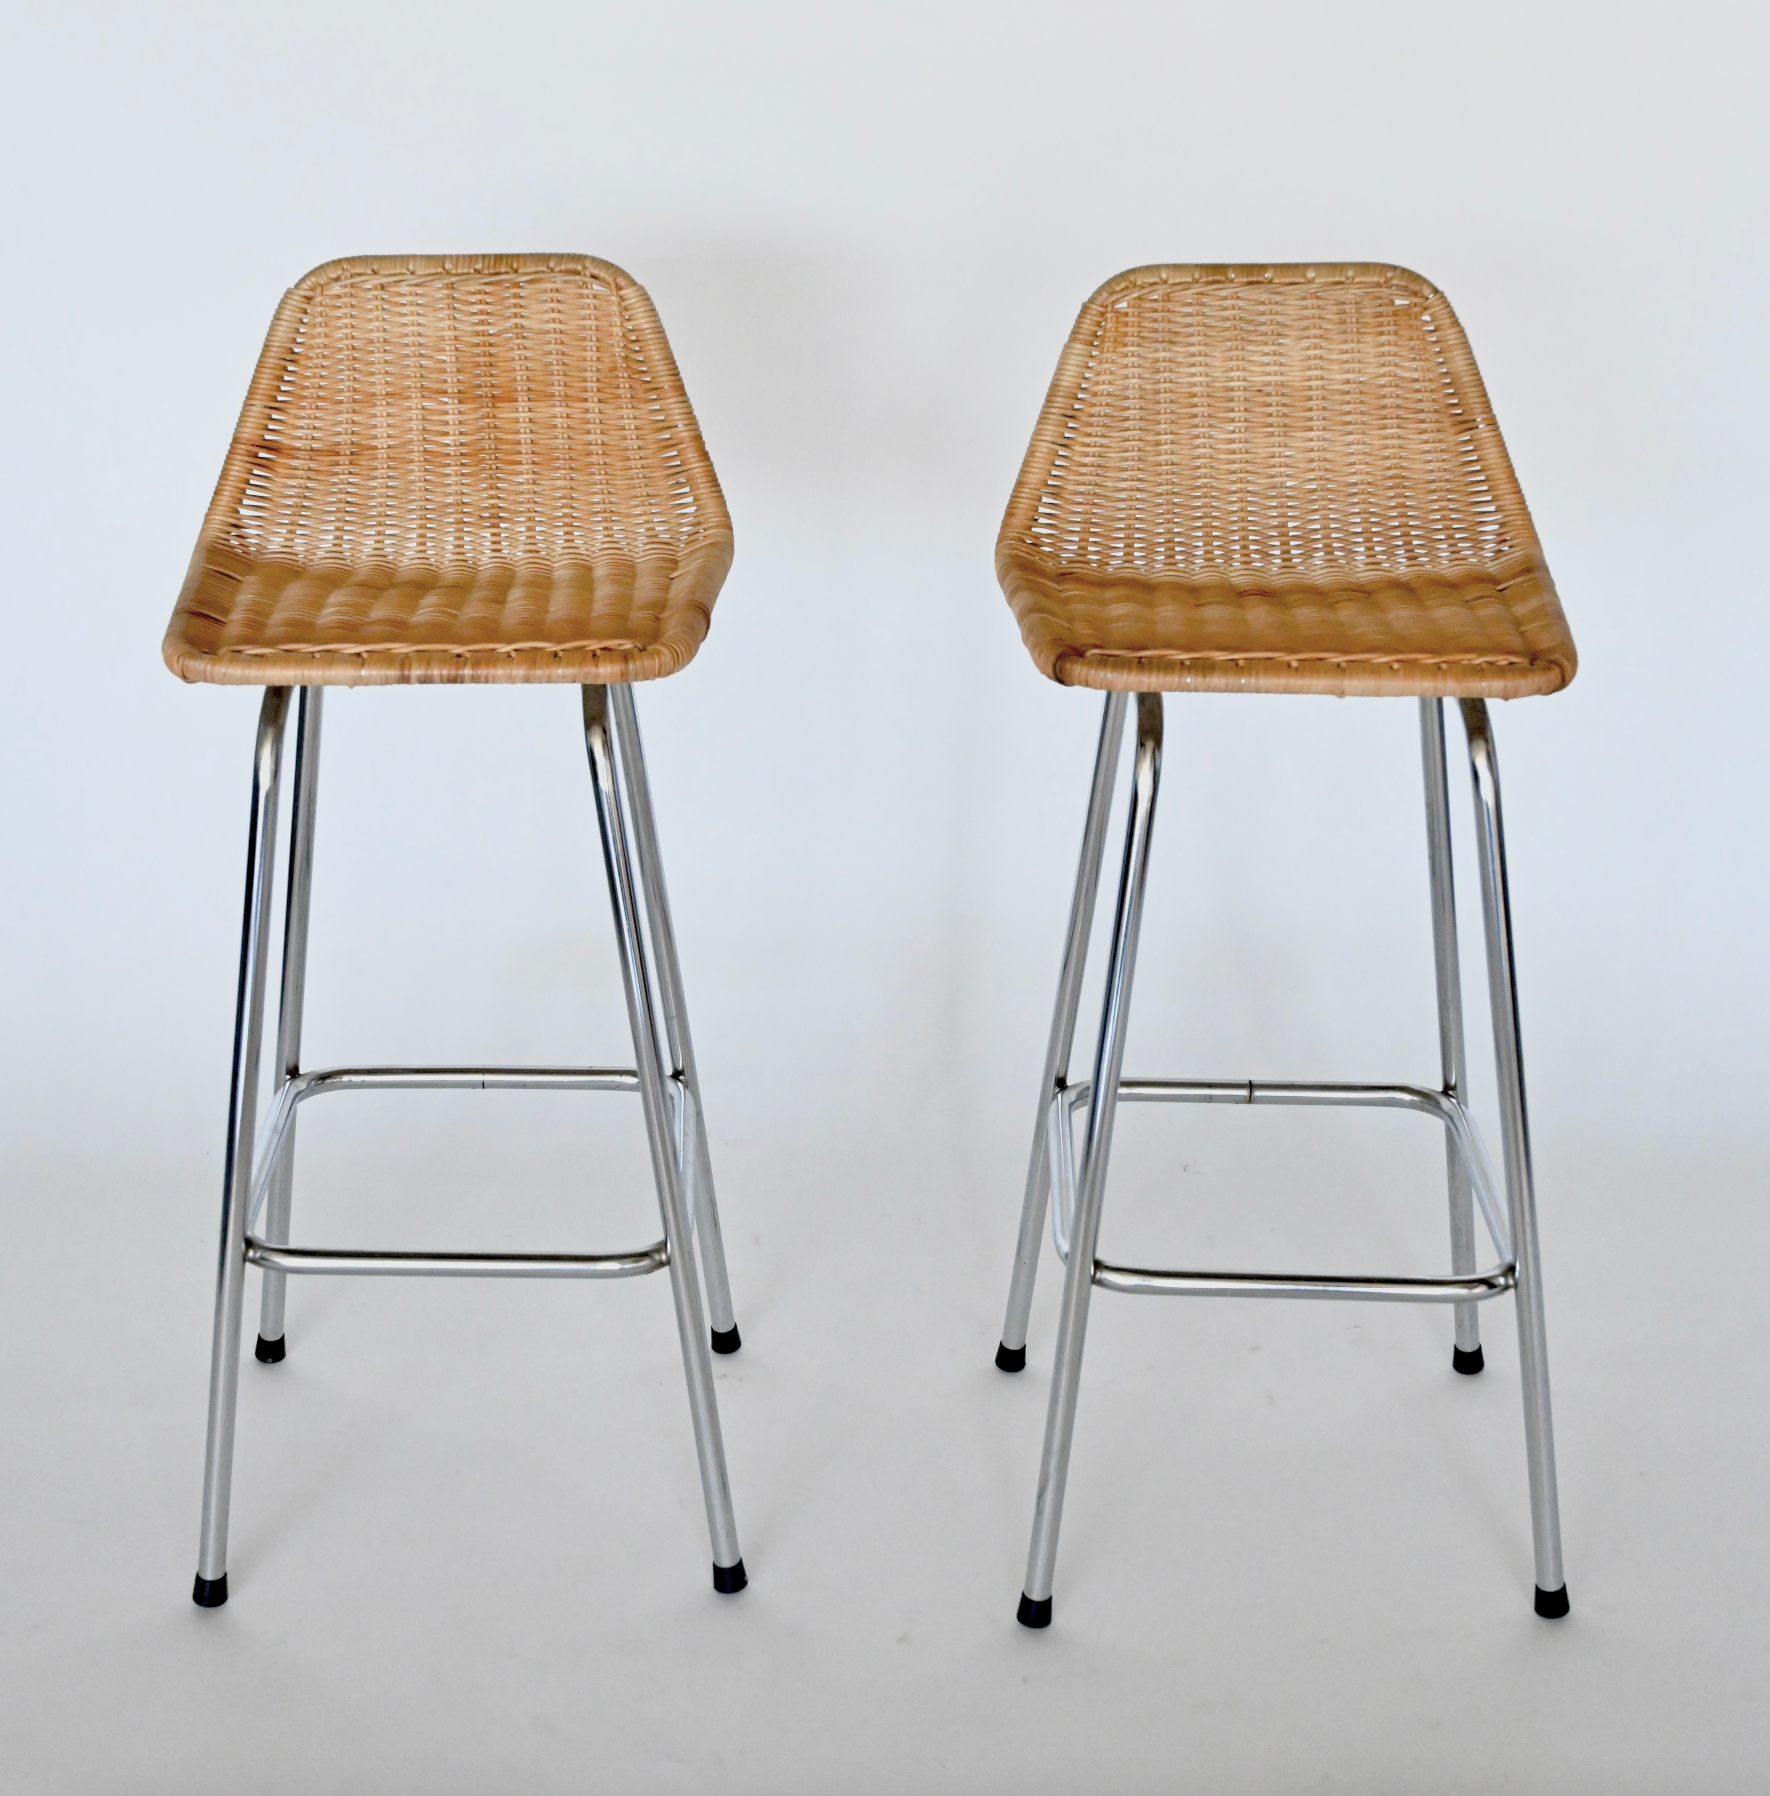 PAIR OF RATTAN AND CHROME COUNTER STOOLS BY DIRK VAN SLIEDRECHT